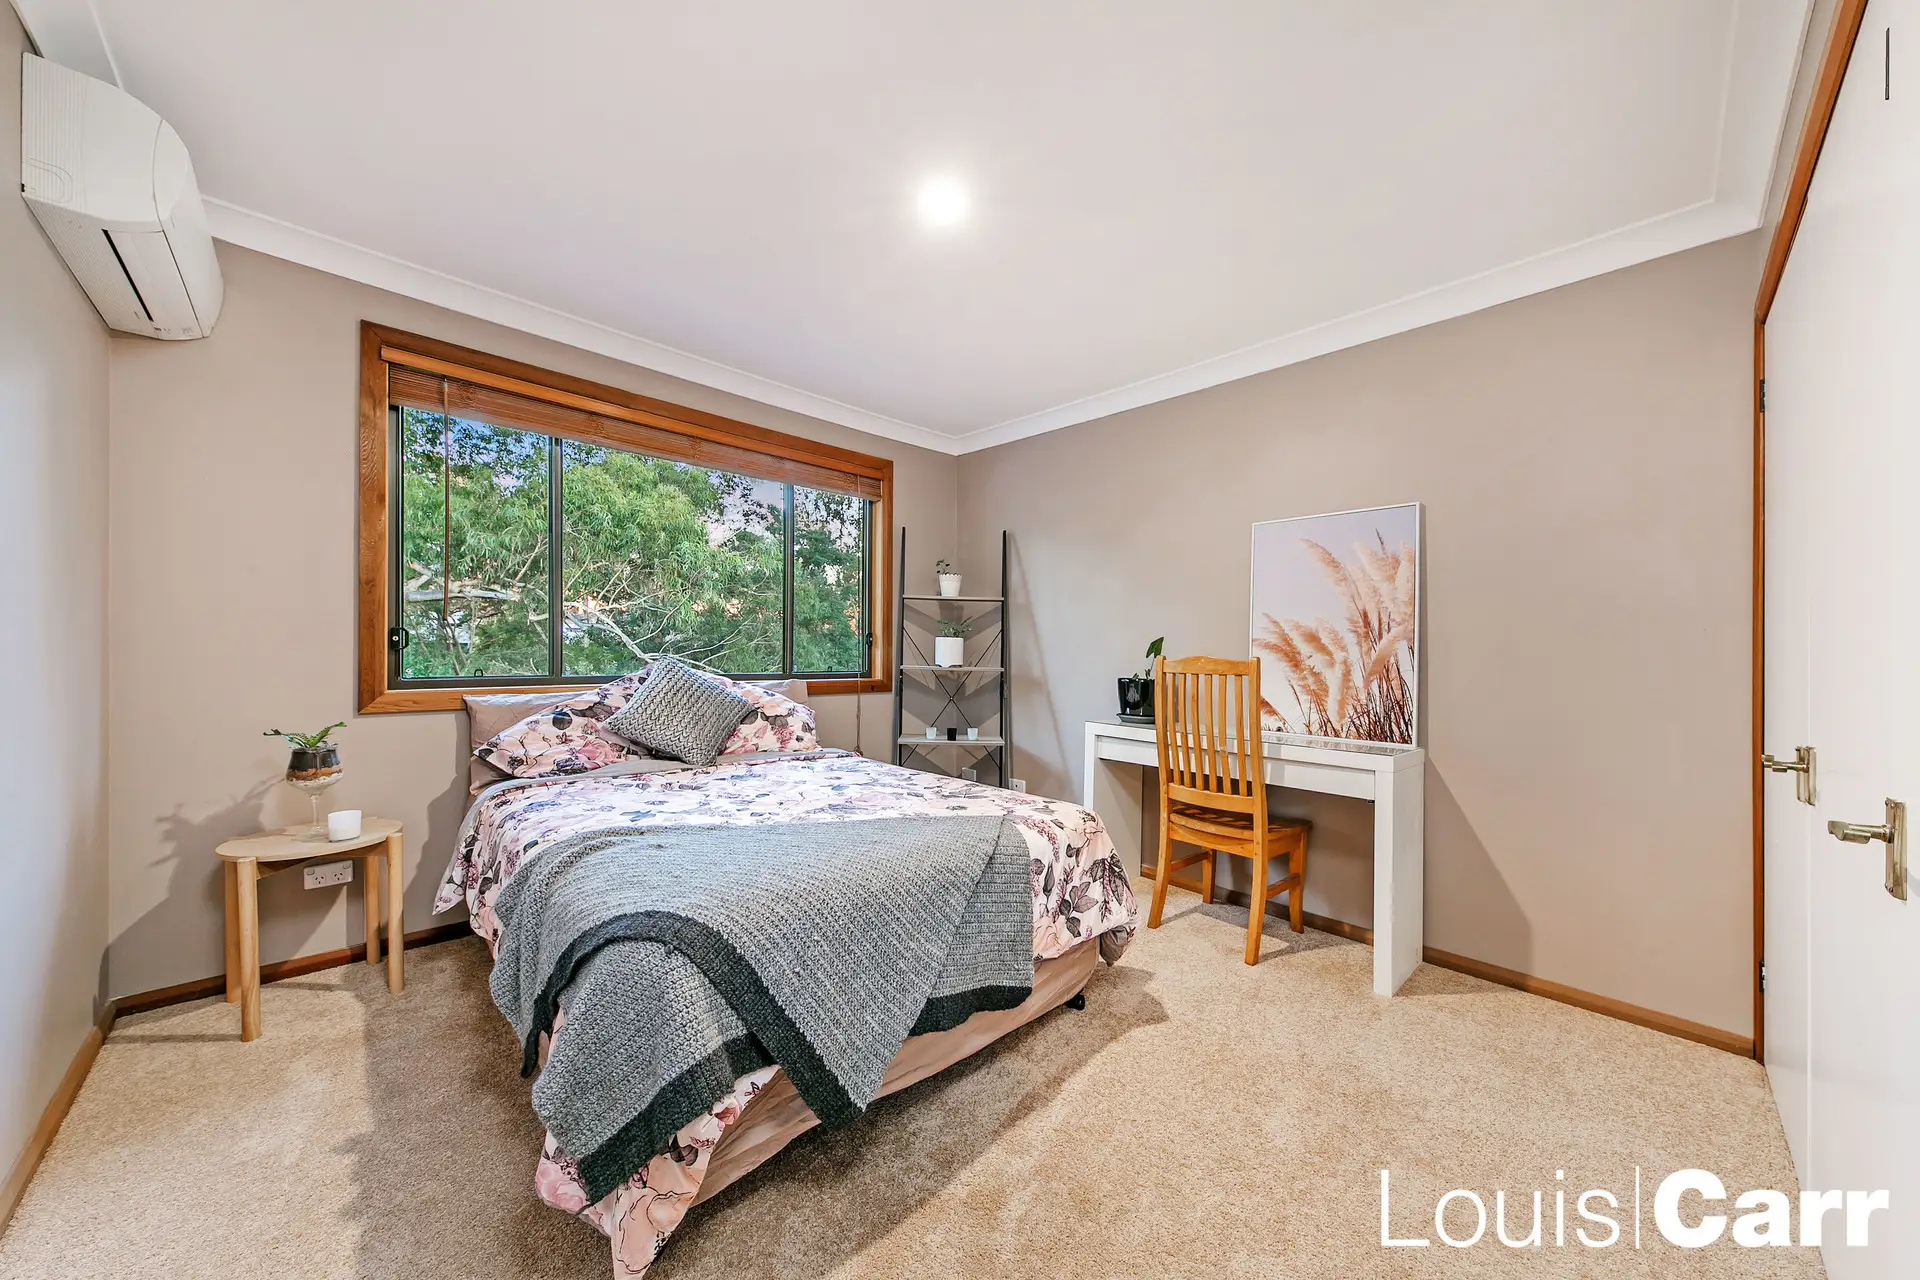 Photo #12: 13 Cairngorm Avenue, Glenhaven - Sold by Louis Carr Real Estate